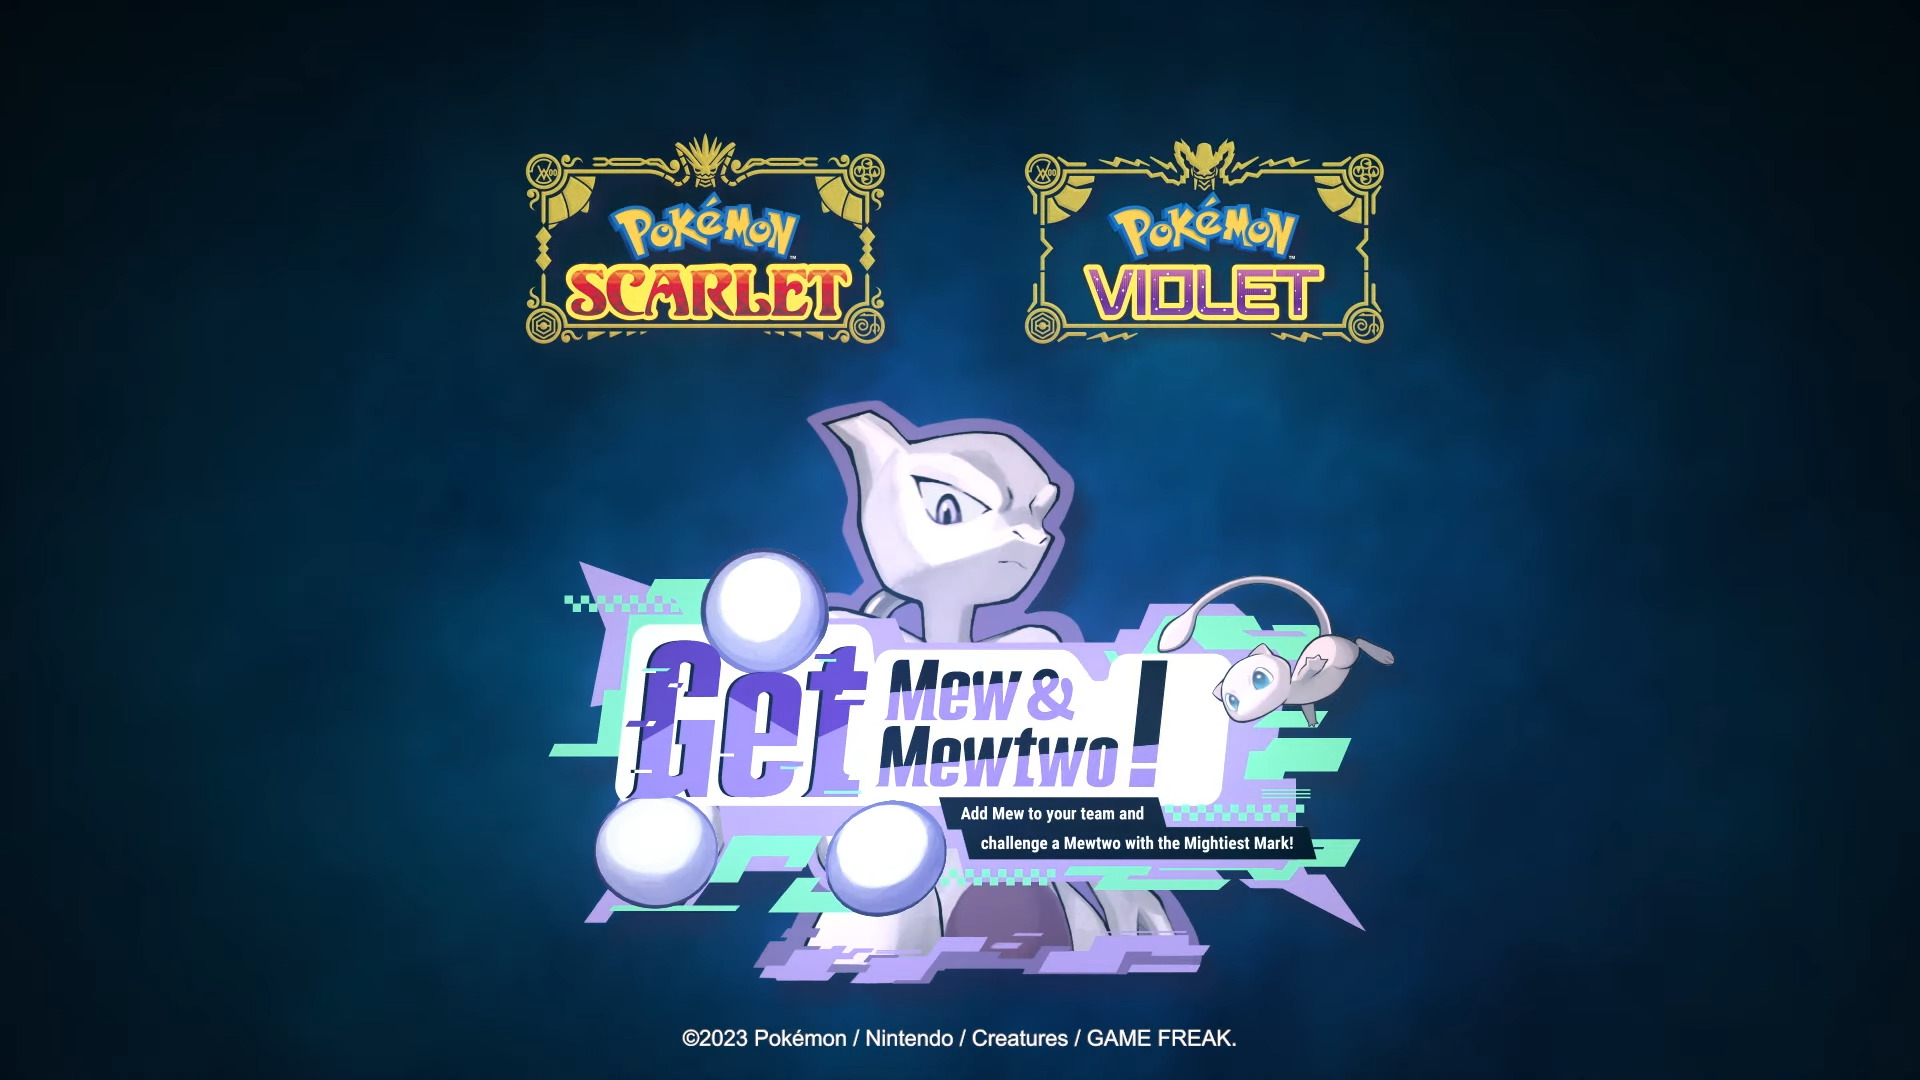 Mew Code: Get Mew & Mewtwo Event - Pokemon Scarlet and Violet Guide - IGN